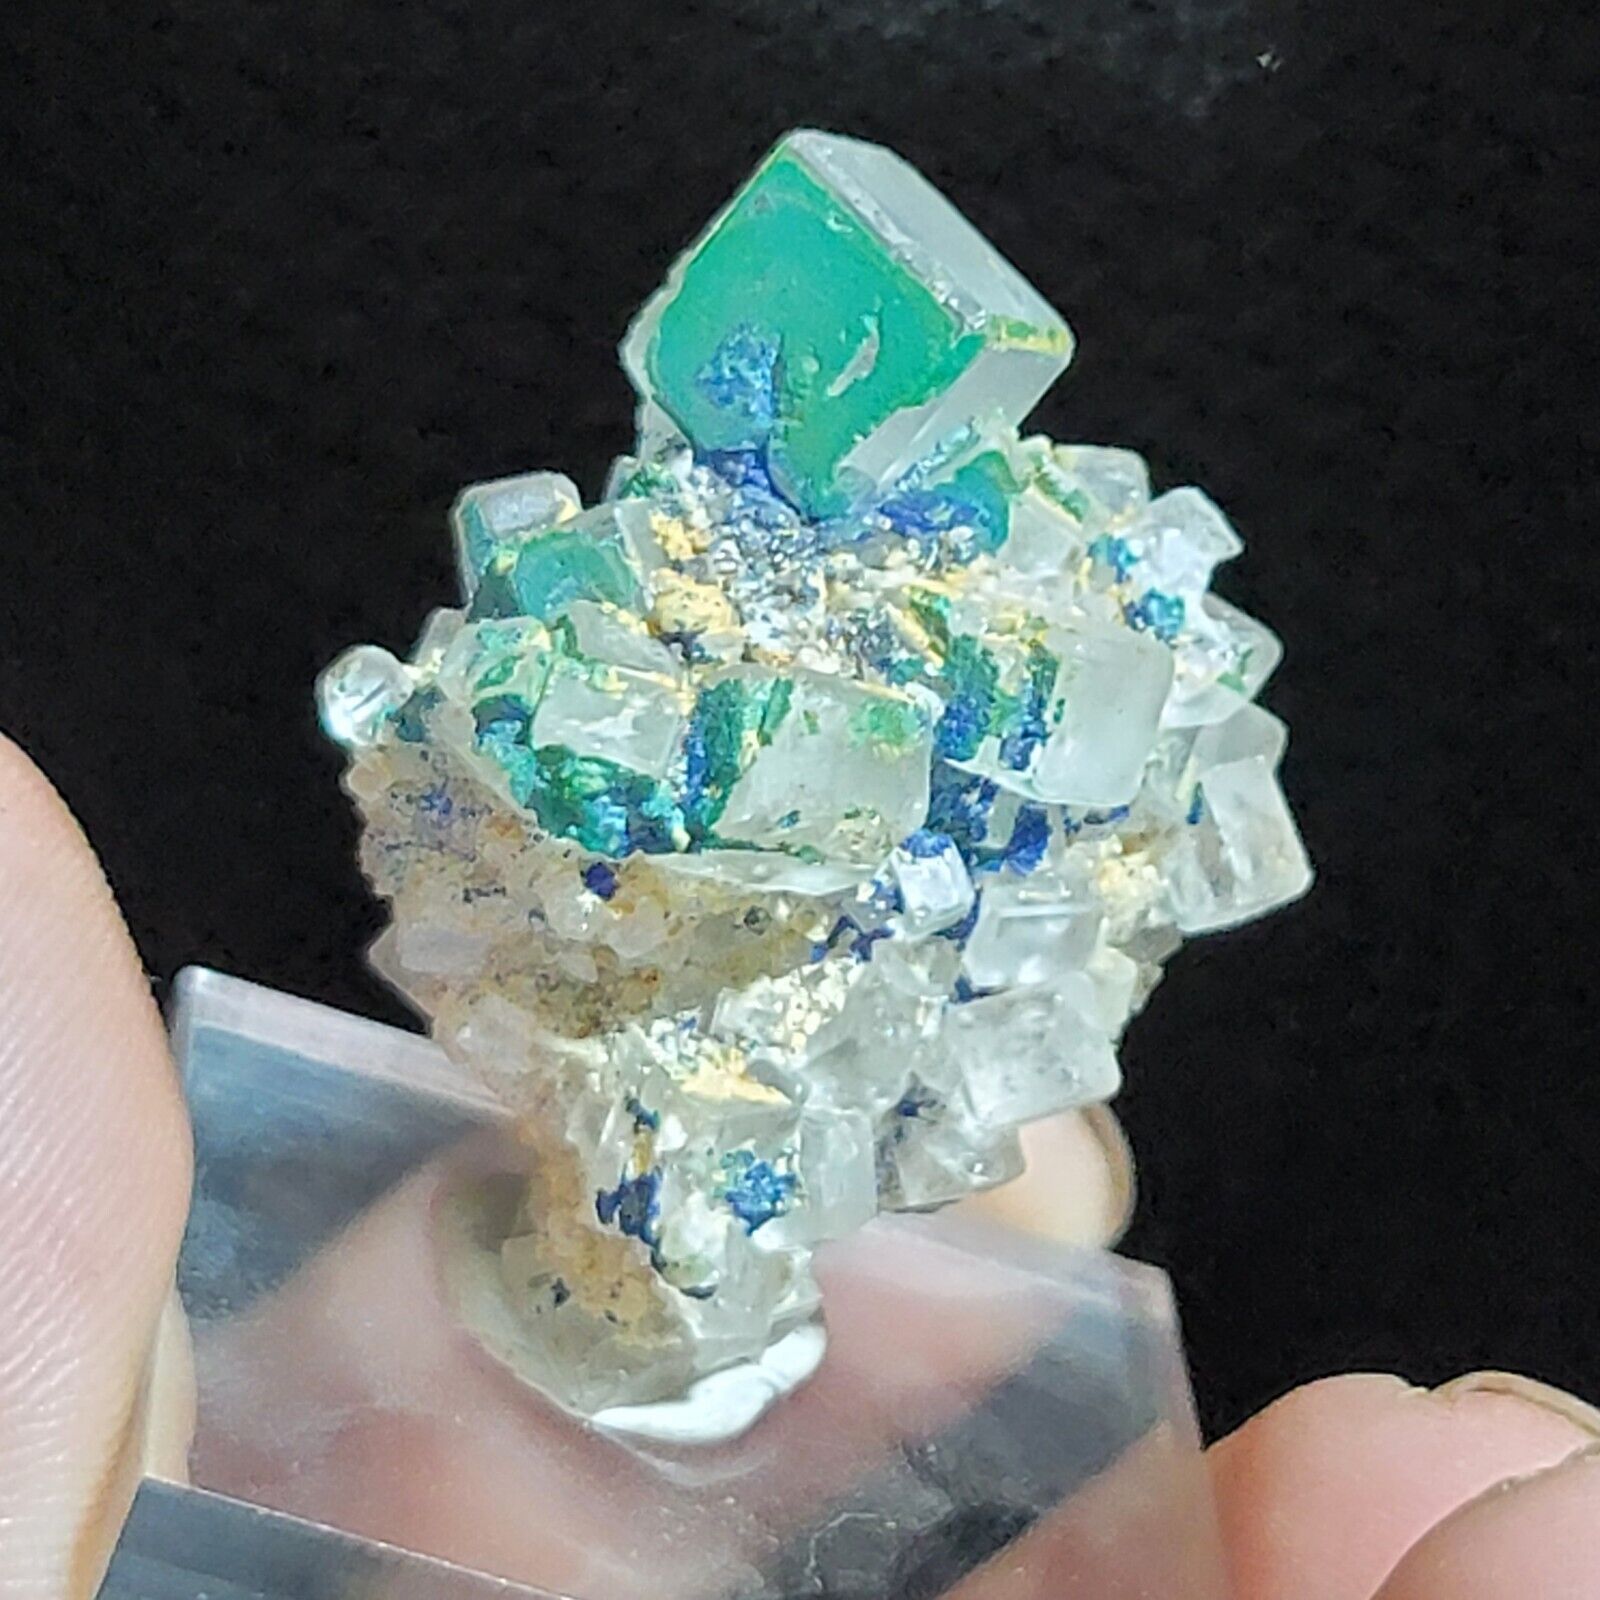 ☆Extremly Rare Malachite And Azurite On Fluorite From Italy ☆ One Time Find☆